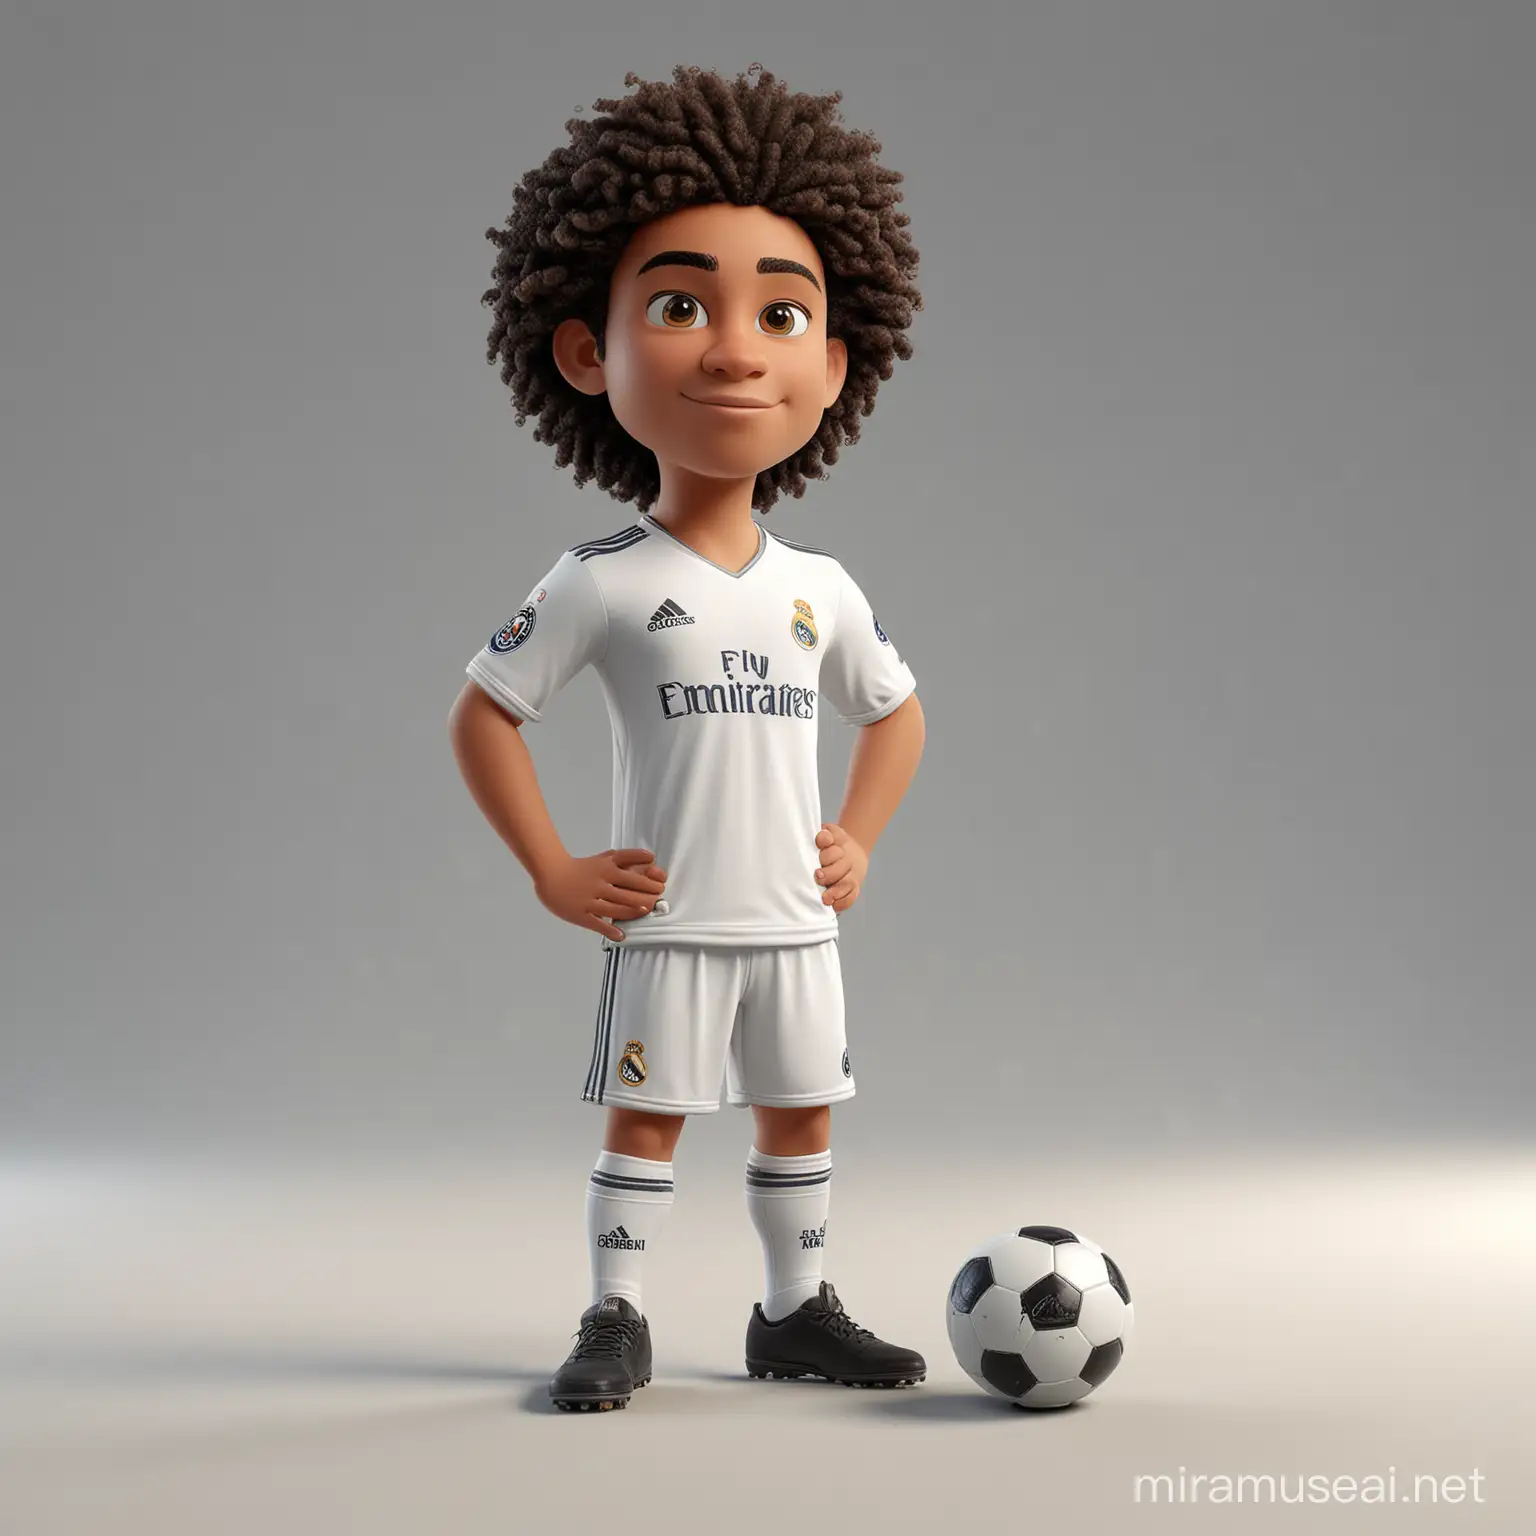 Cute Cartoon Soccer Player Resembling Marcelo in Real Madrid Kit